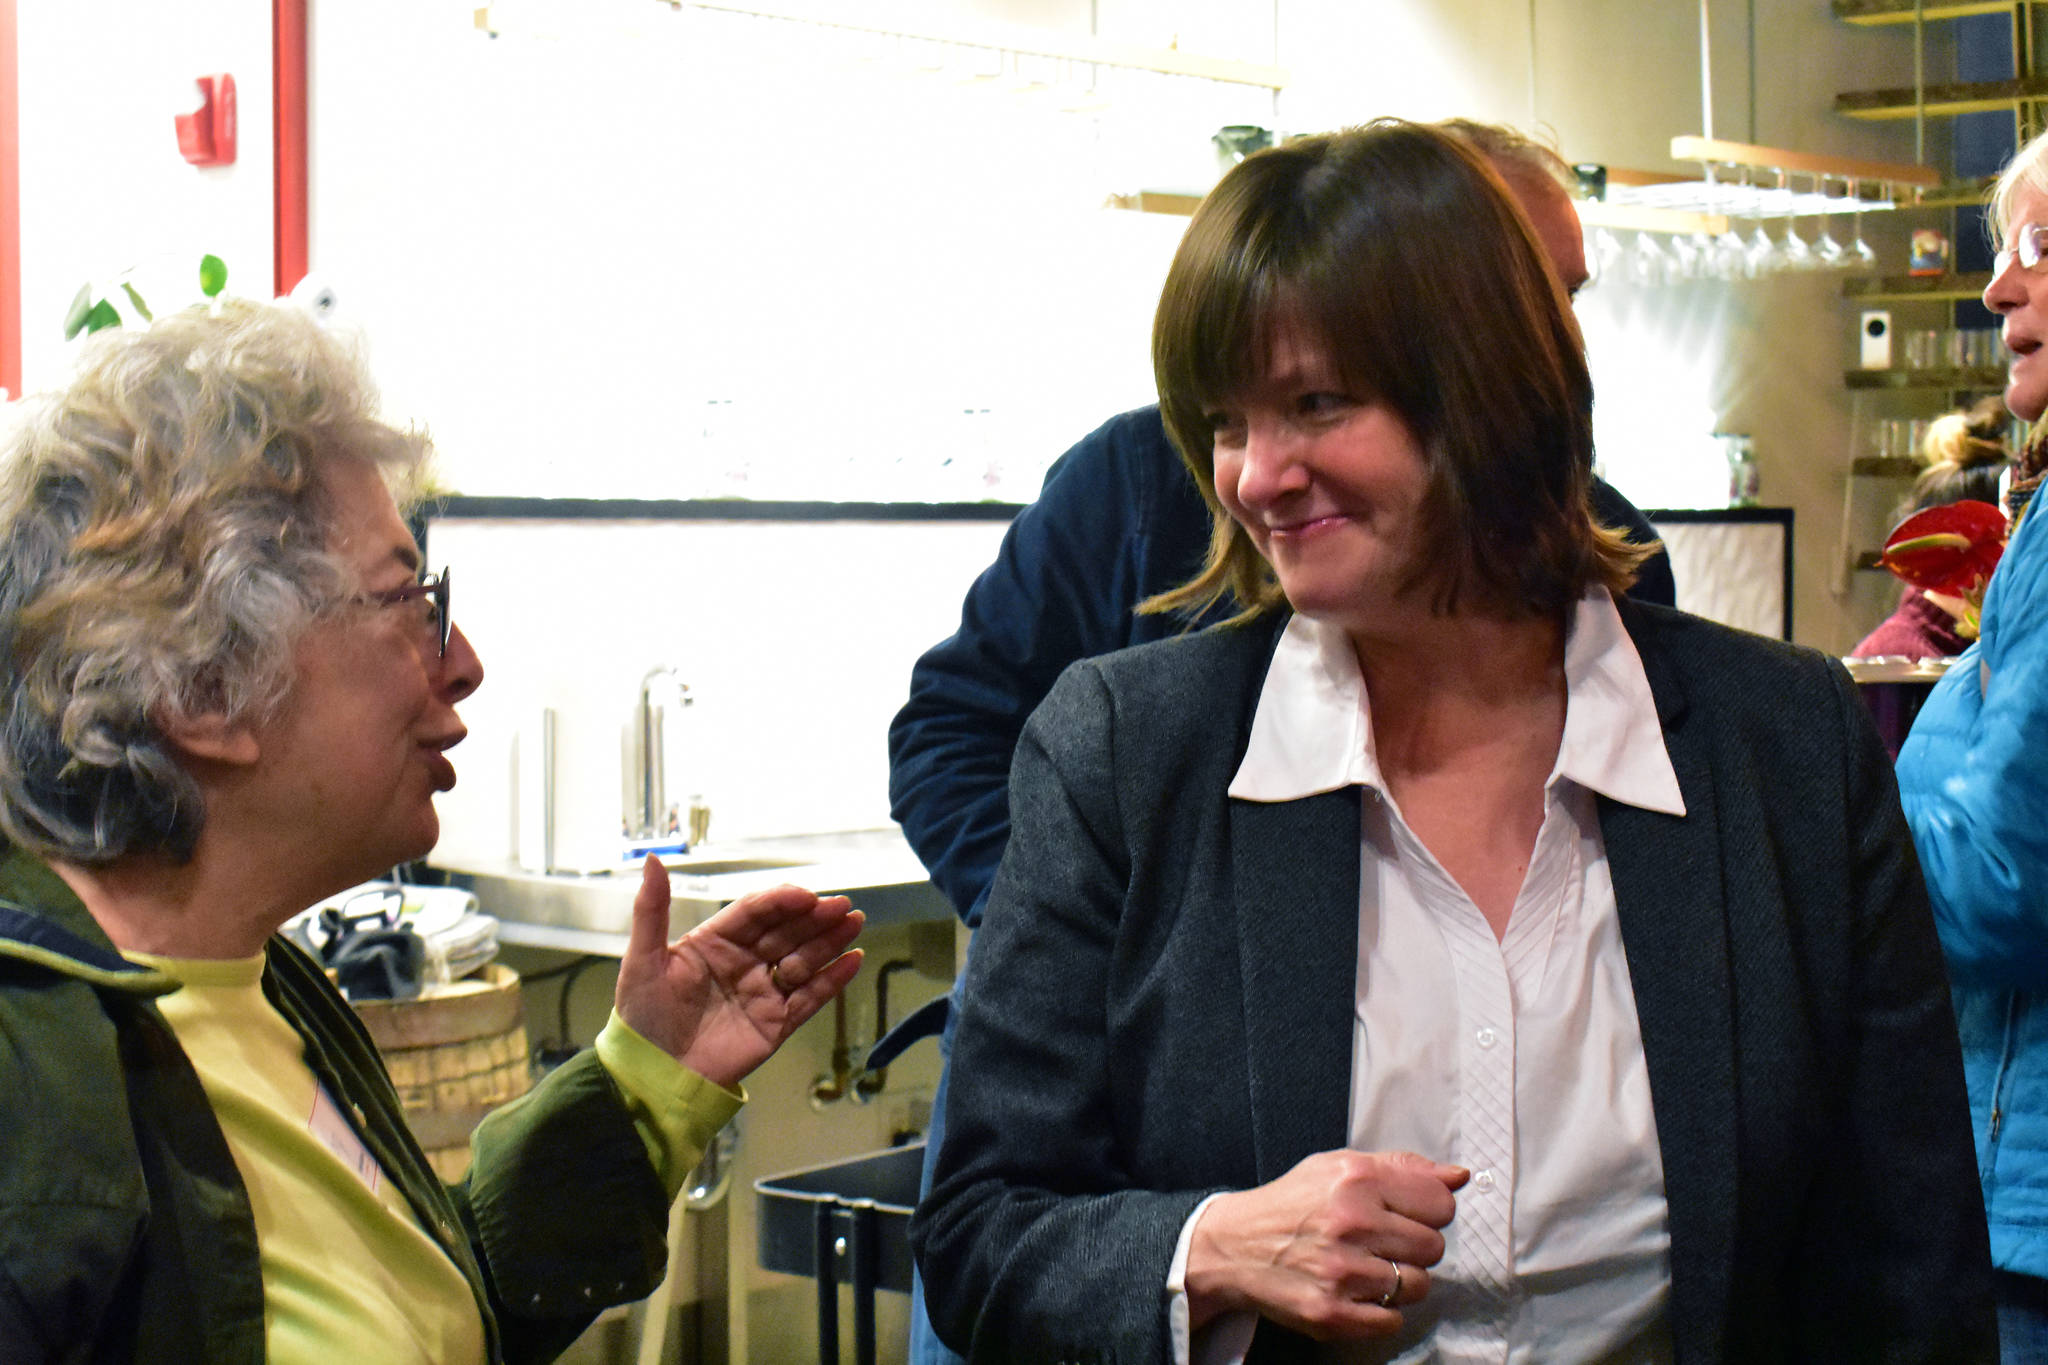 Congressional candidate Alyse Galvin, an Independent seeking to unseat Congressman Don Young, R-Alaska, meets with Juneauites at the Almalga Distillery on Saturday, Nov. 23, 2019. (Peter Segall / Juneau Empire File)